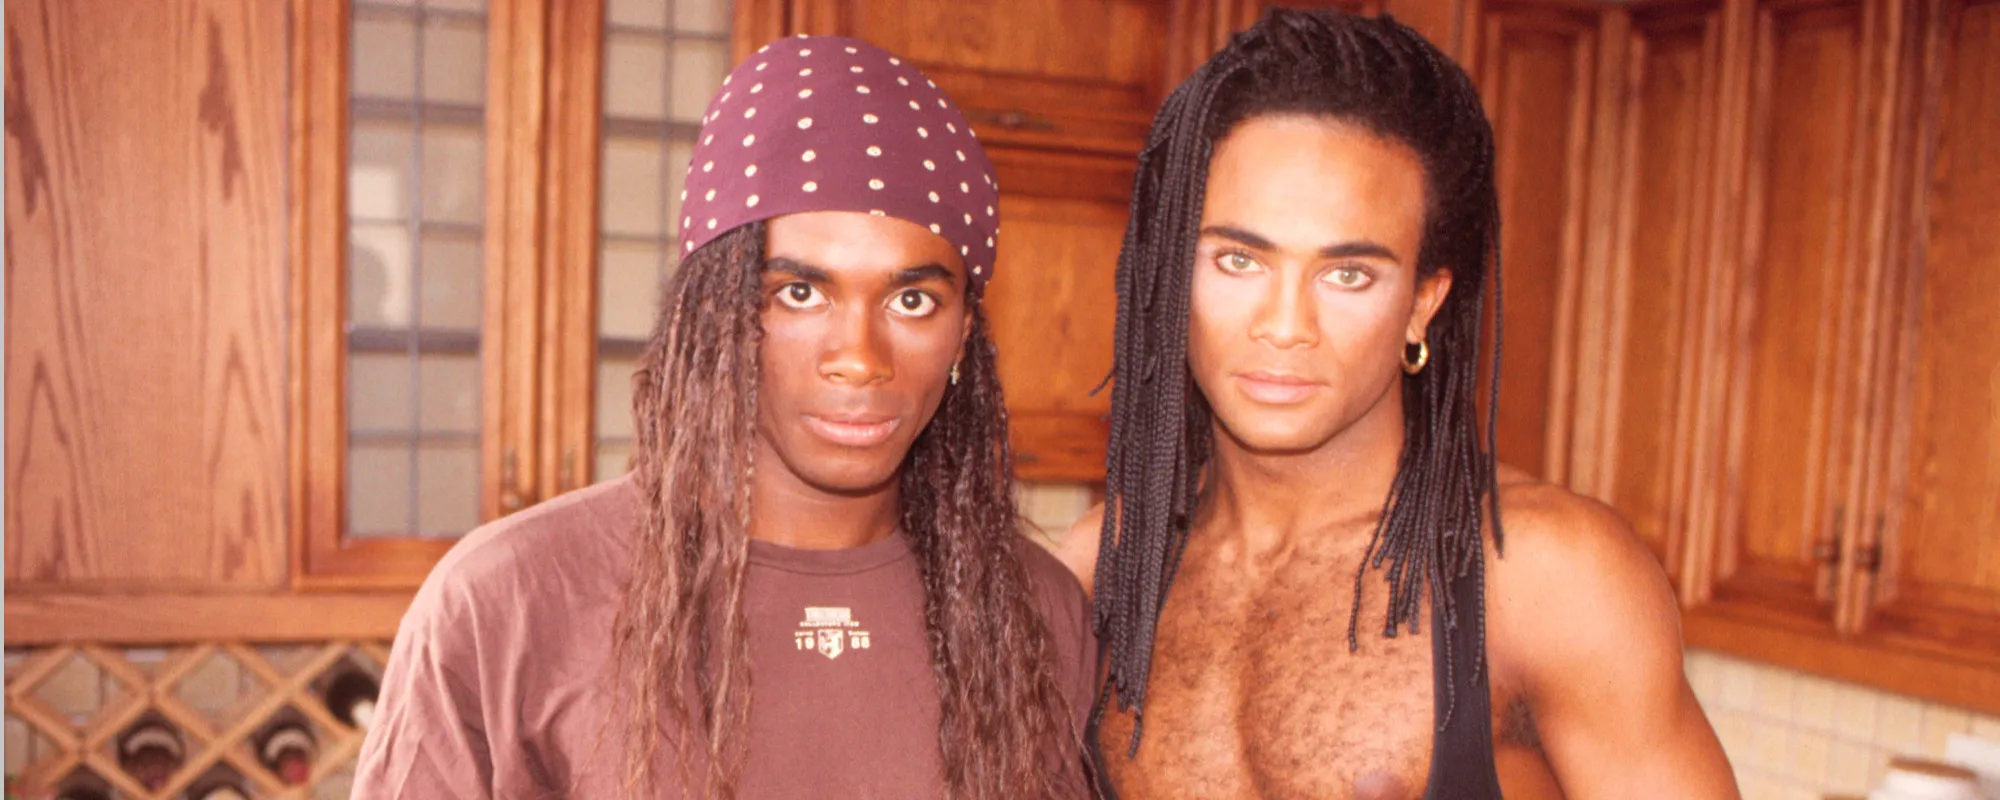 Where Are They Now?: Milli Vanilli